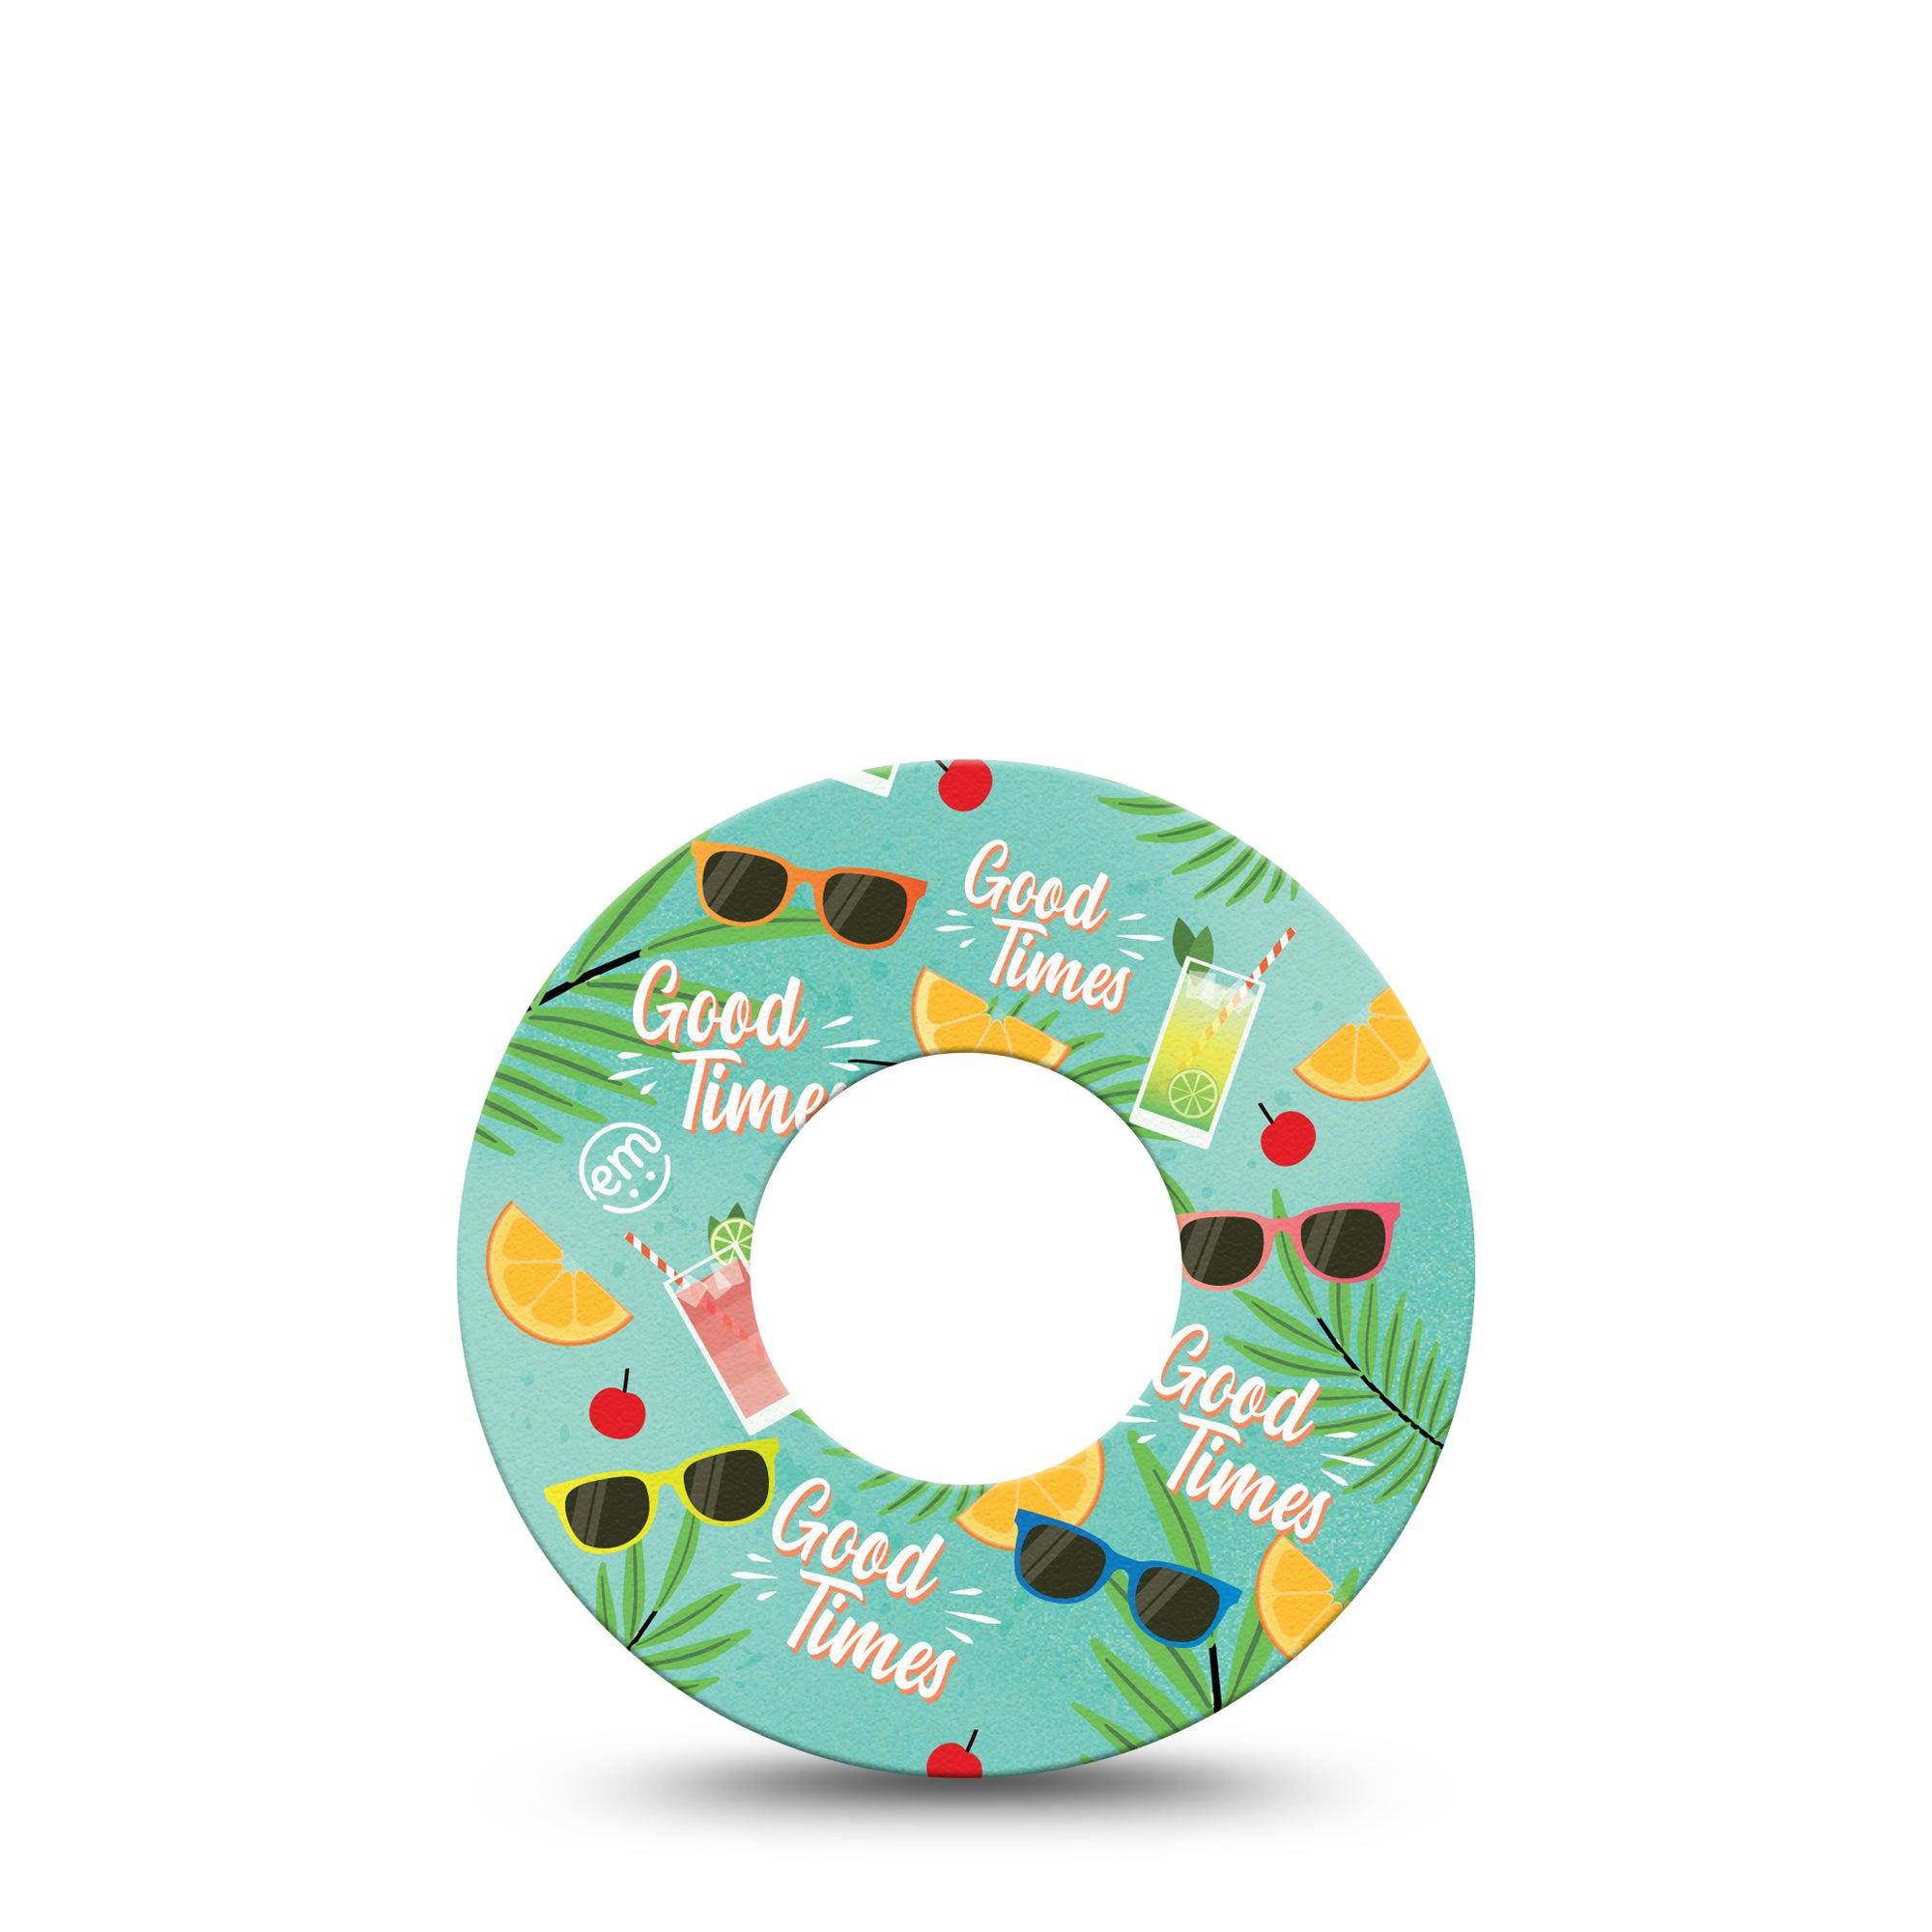 ExpressionMed Good Times Libre 2 Tape, Single, Relaxing Summer Inspired, CGM Plaster Patch Design